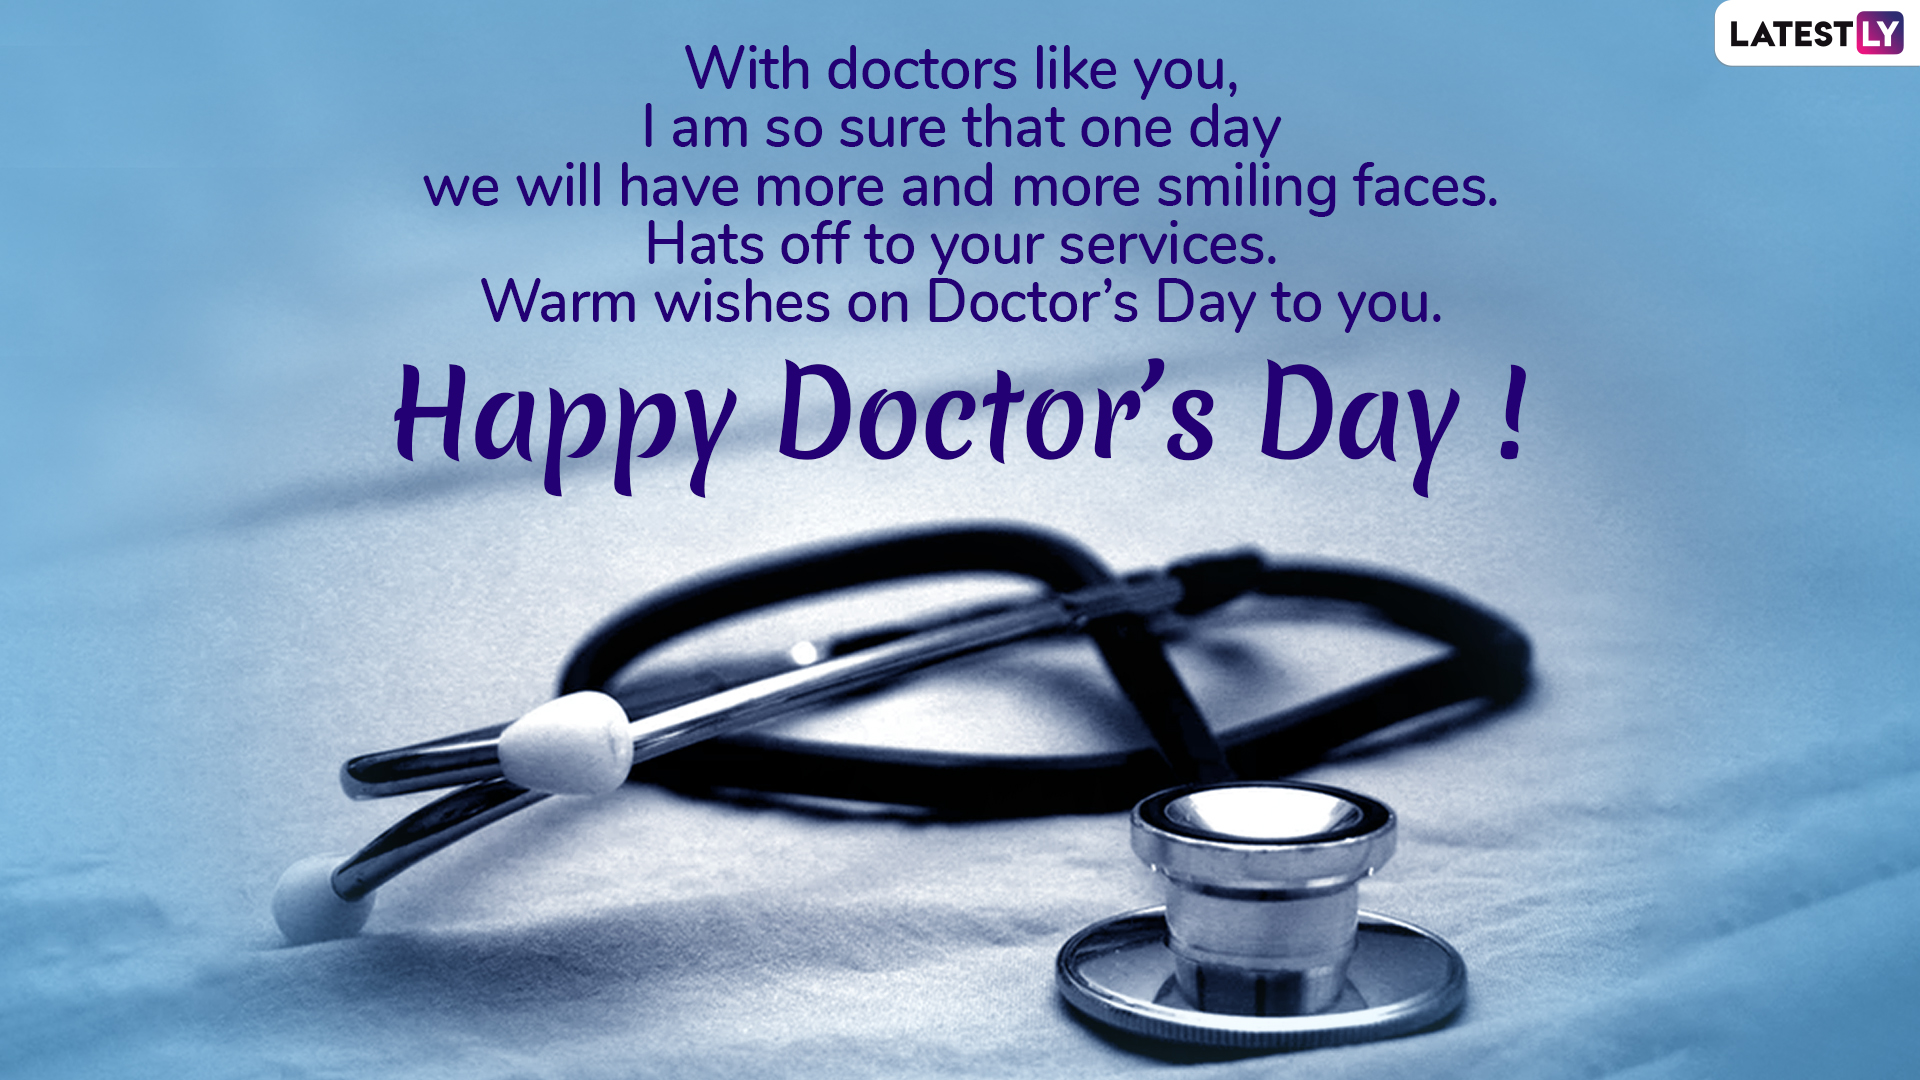 Doctor s Day Images Quotes And Greeting Cards For Free Download Online 